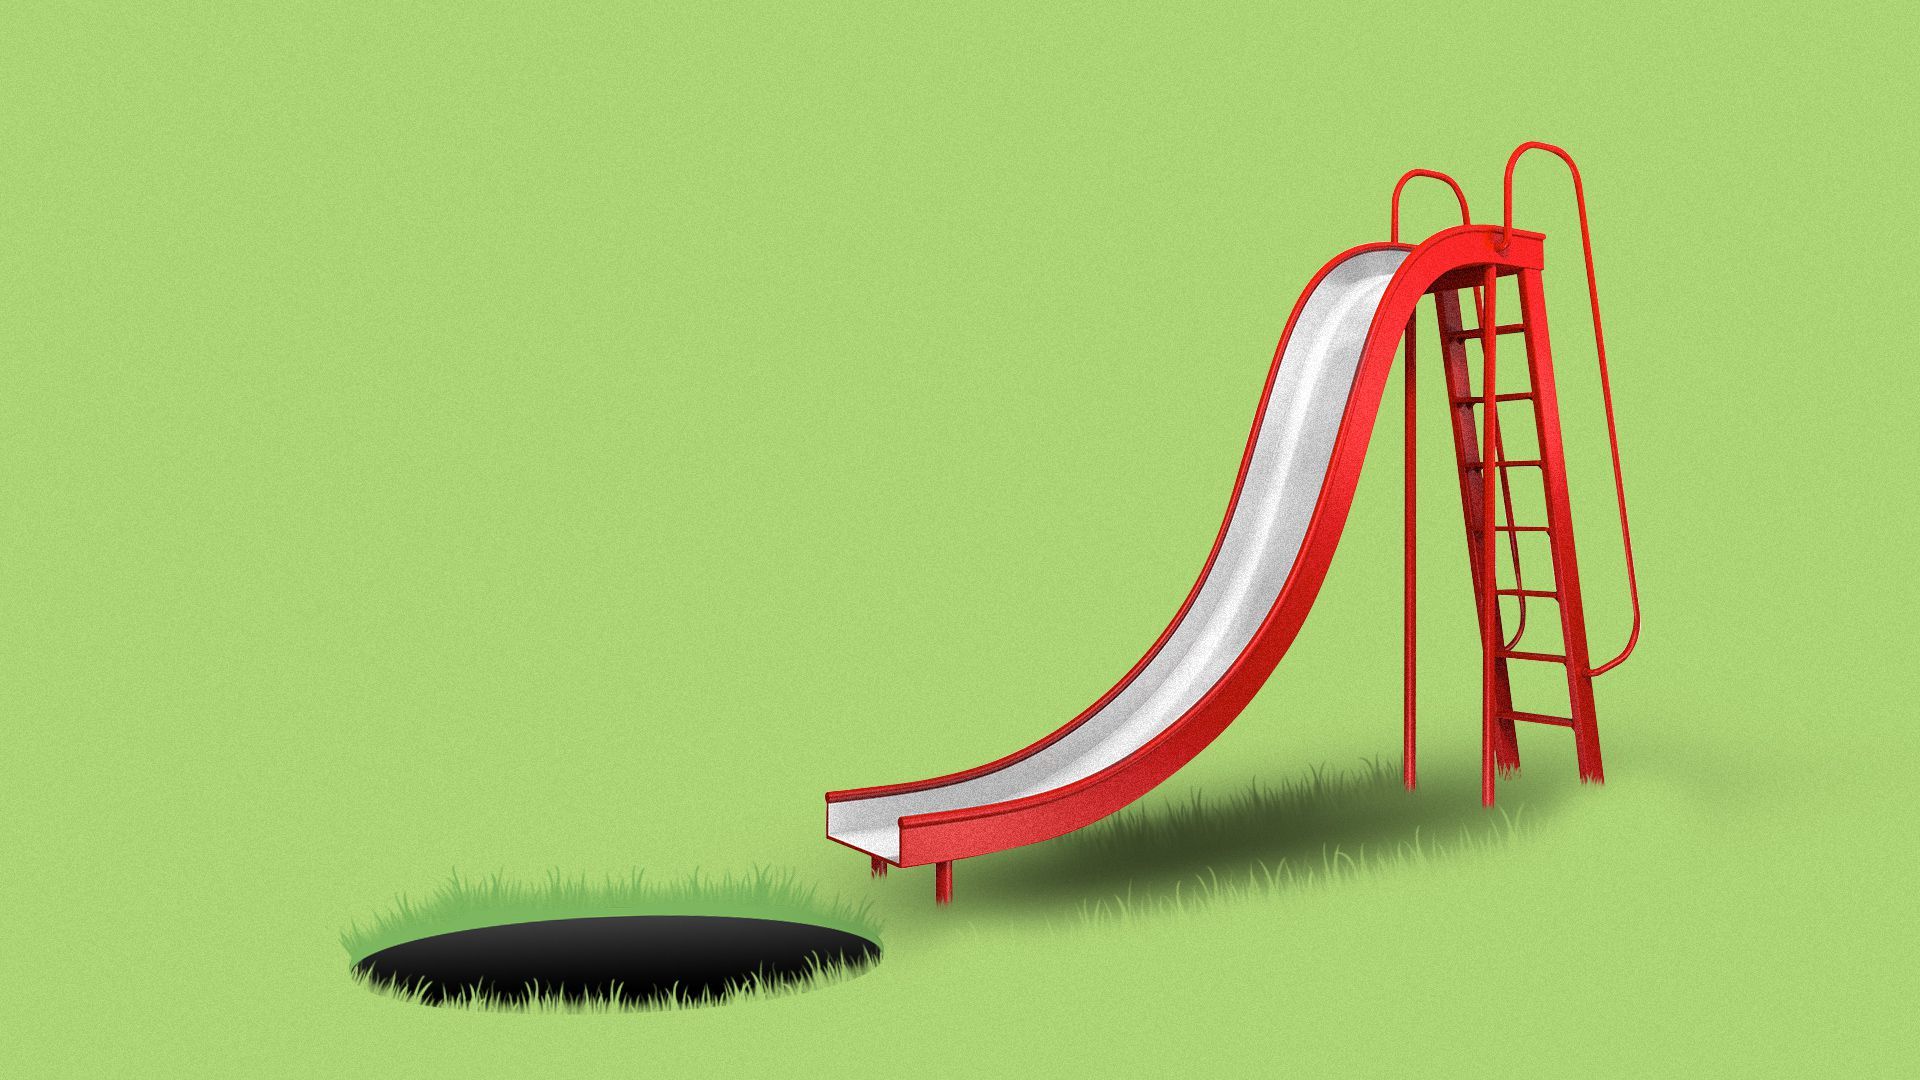 Illustration of a playground slide with a hole at the bottom of the slide part